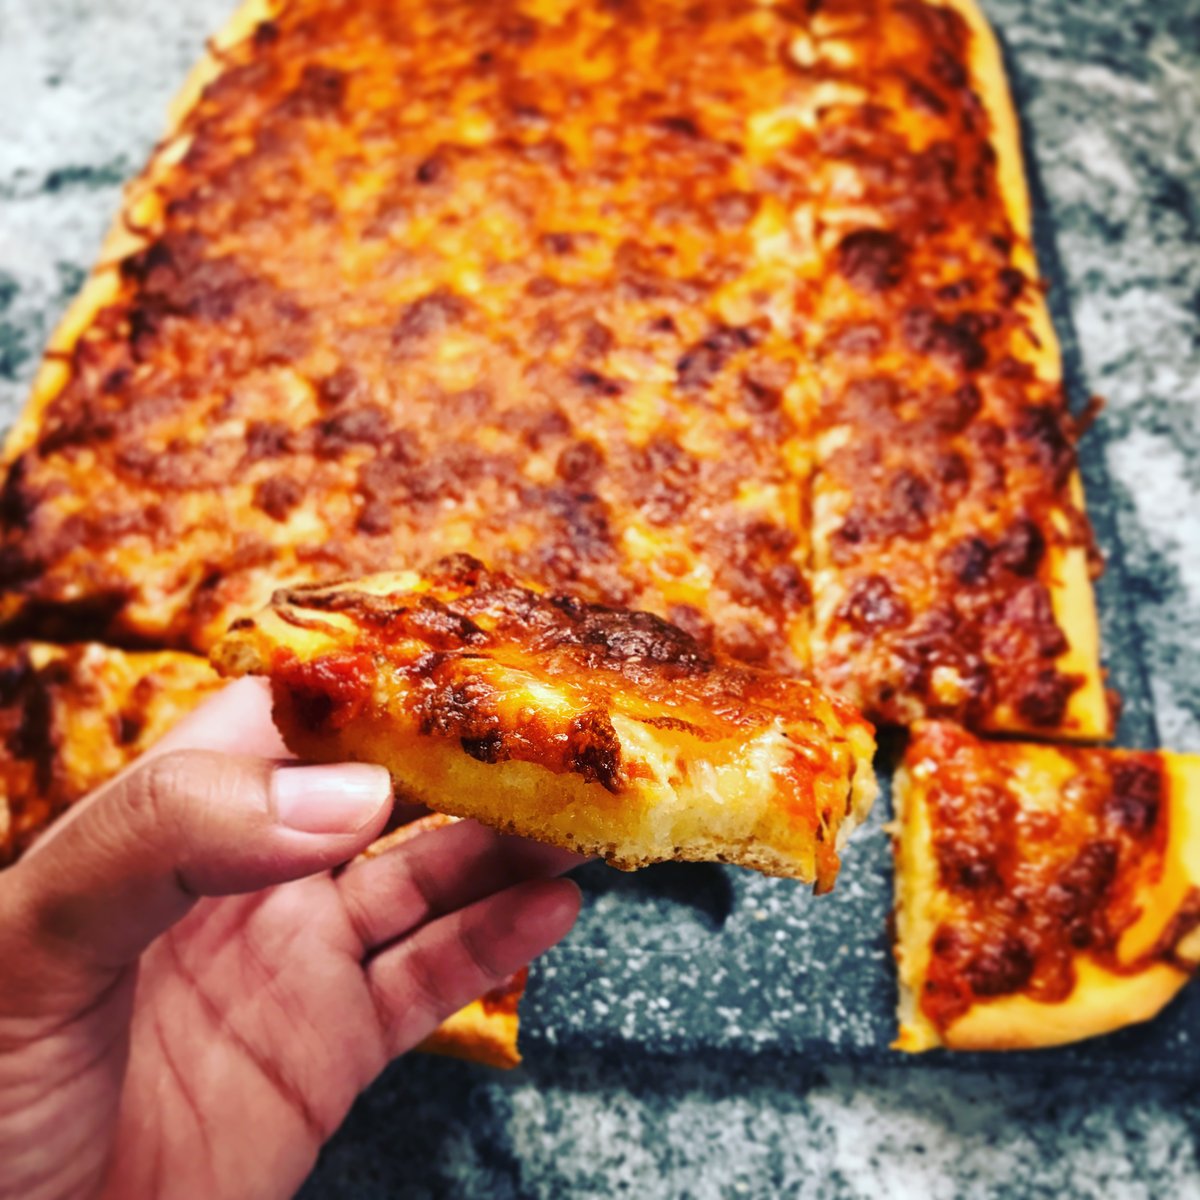 Bread #39: Sicilian-Style Thick Crust Pizza. I made this a while ago but neglected to post. I think? I feel like I posted it but then I couldn't find it??? Anyway it was good! Second best pizza after the deep dish.